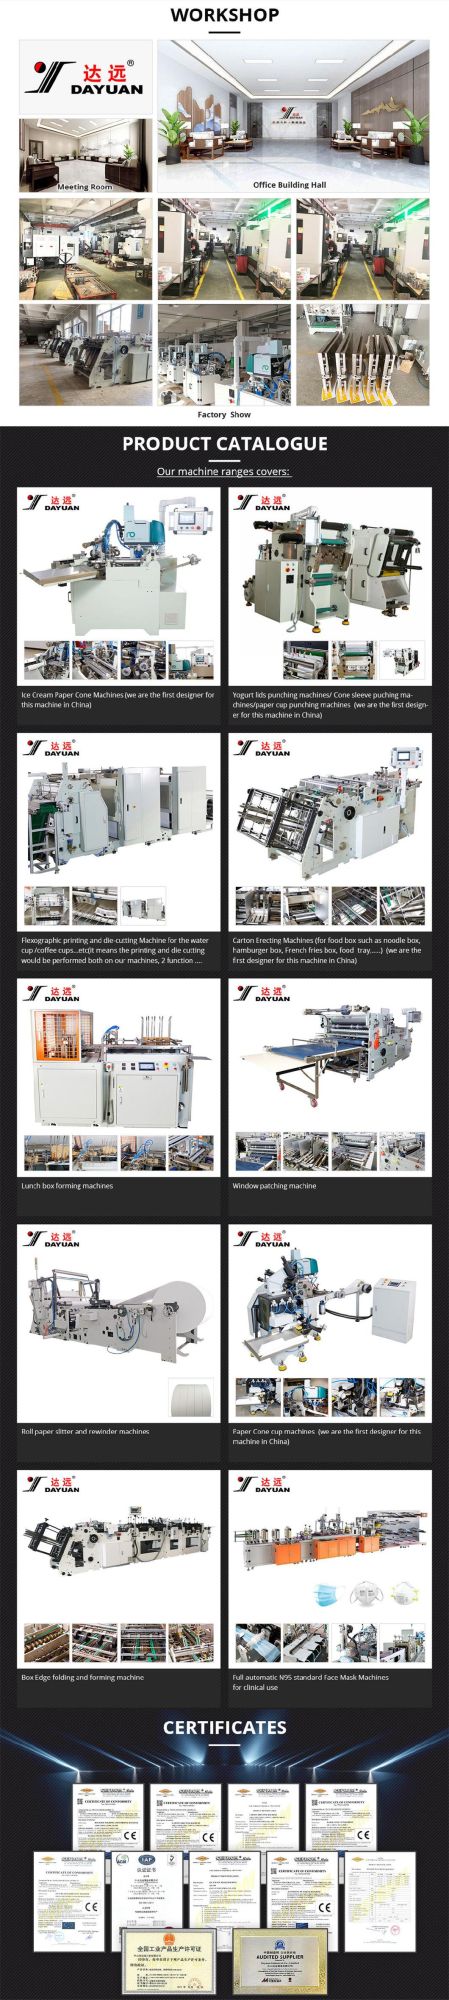 Exclusive Yogurt Aluminum Foil Cover Punching Machine with CE Certificate